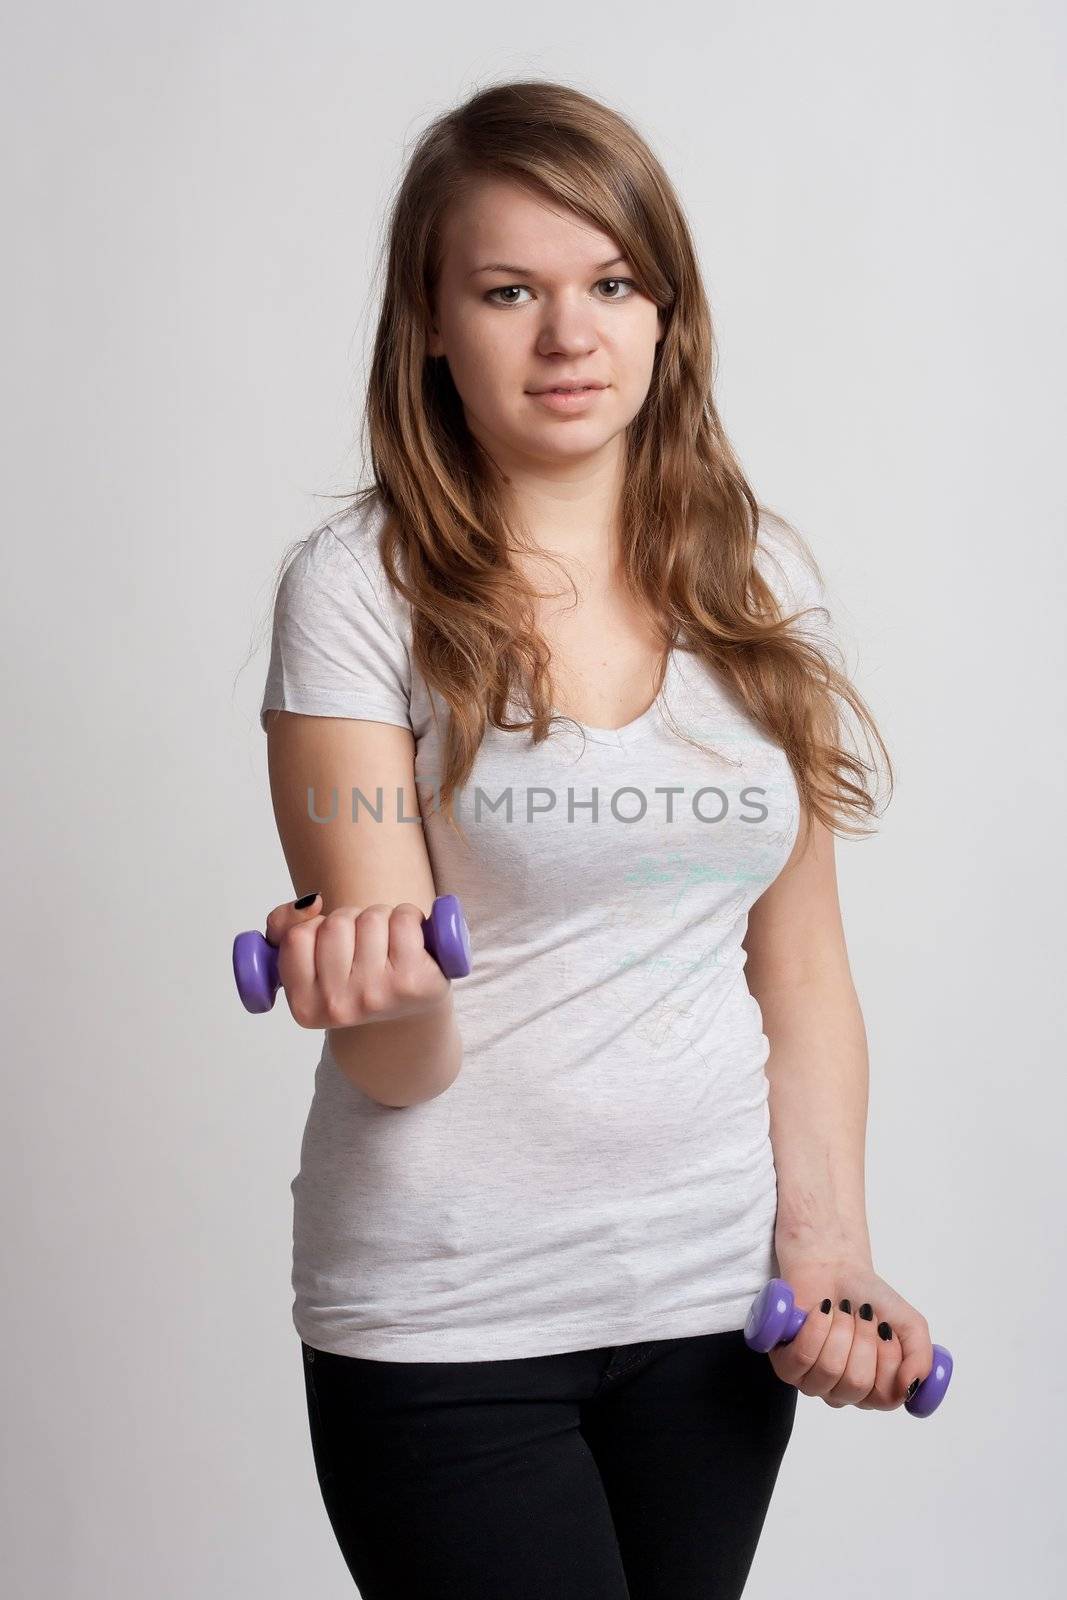 girl on a white background with dumbbells in hand